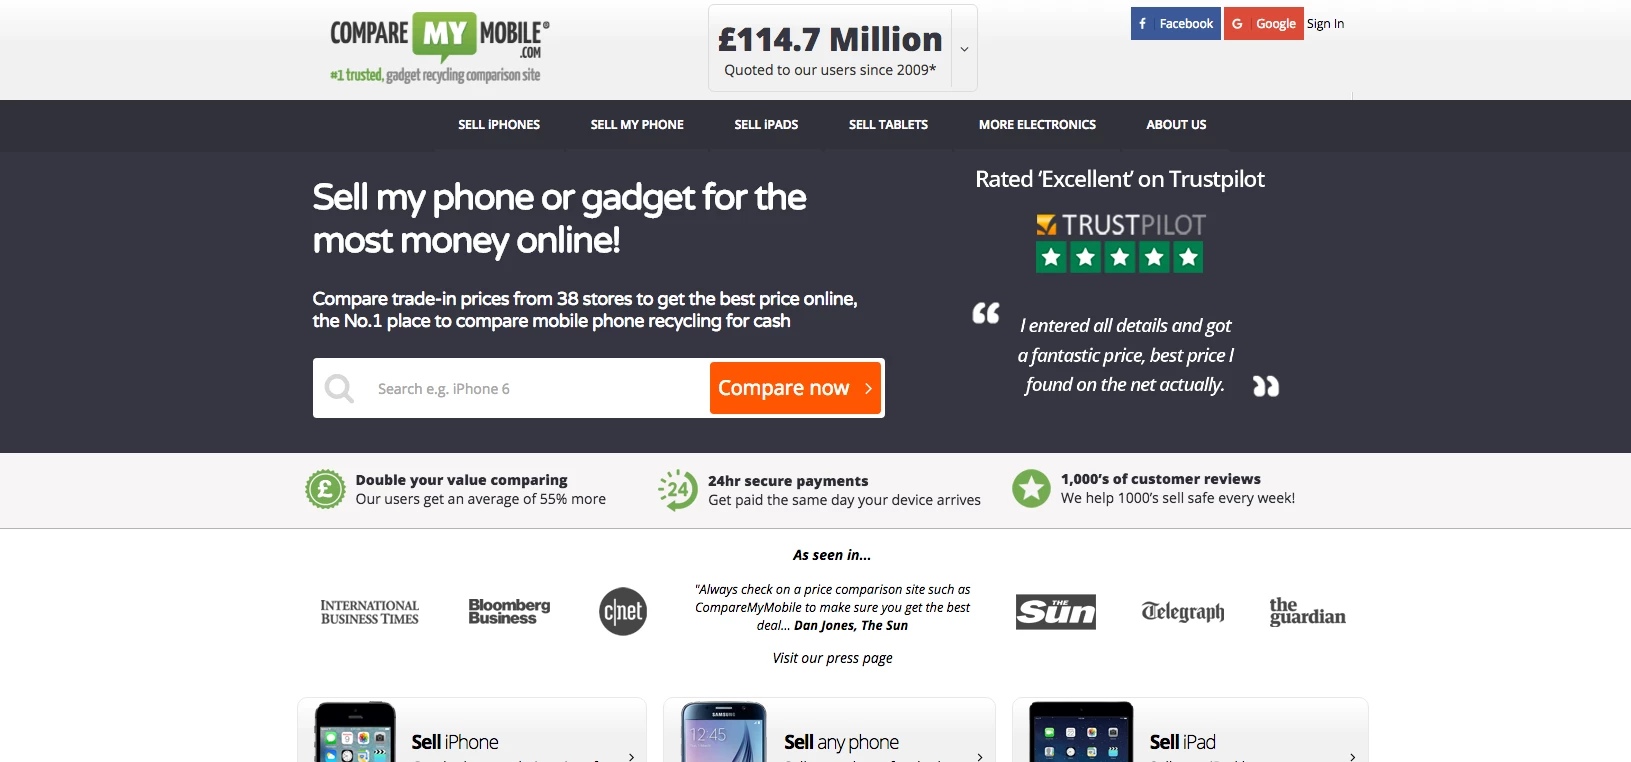 CompareMyMobile.com has been acquired by Decision Tech for an undisclosed sum.